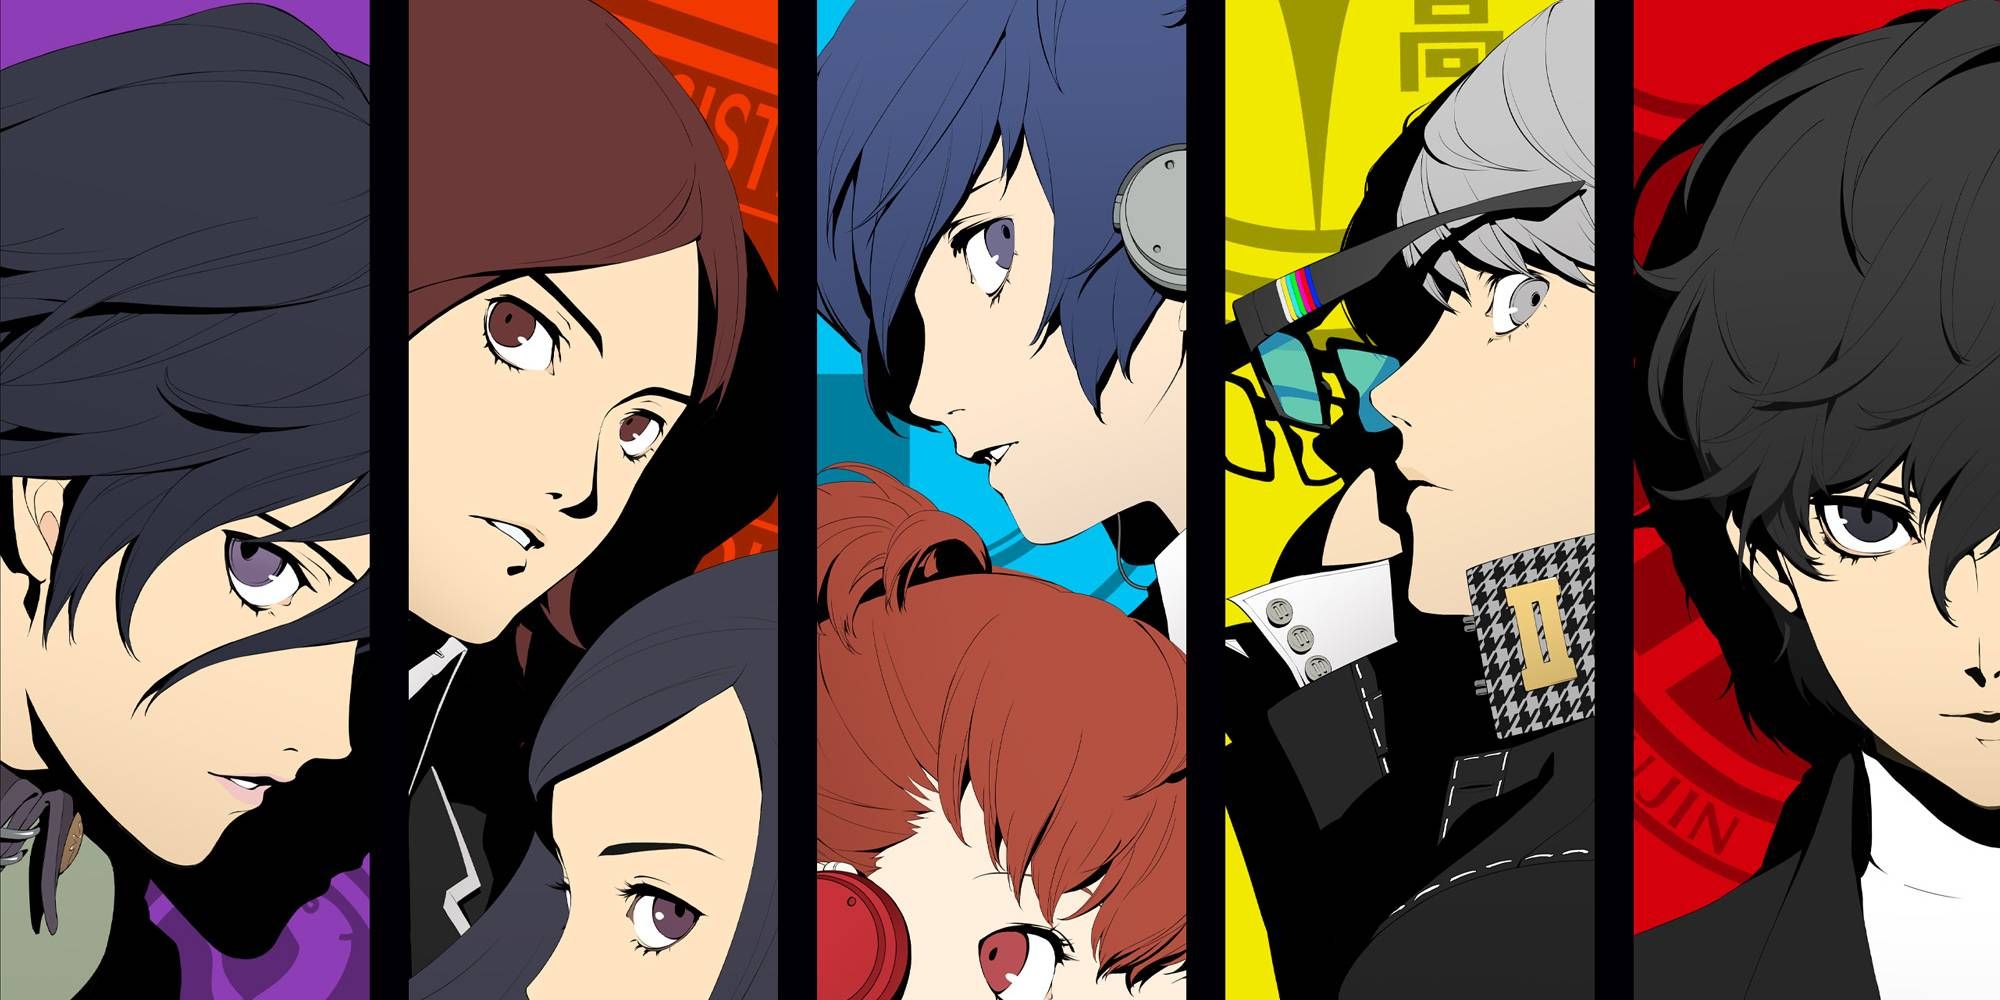 Protagonists of persona 1, 2, 3, 4, and 5